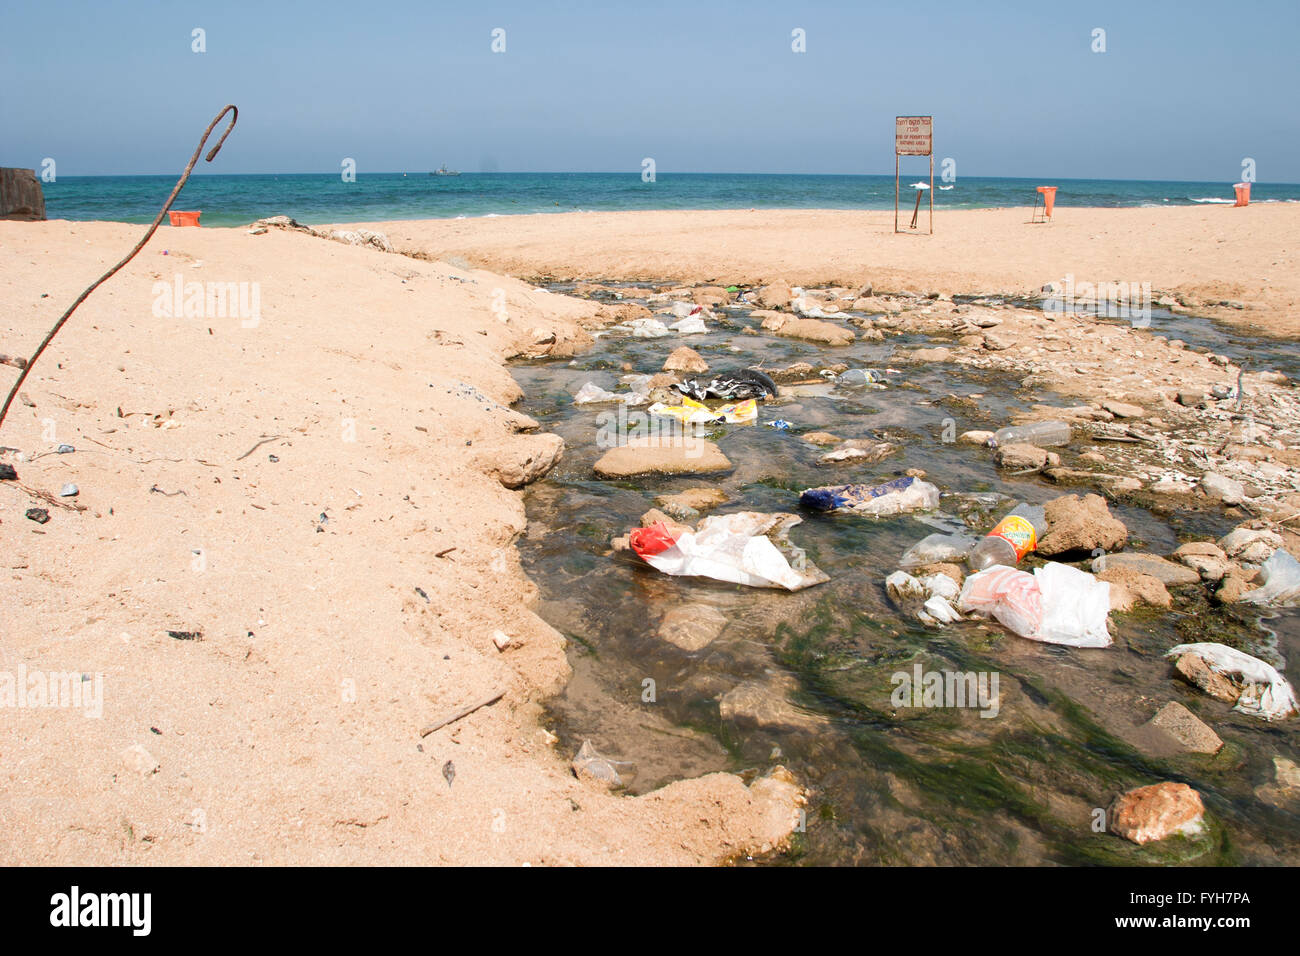 https://c8.alamy.com/comp/FYH7PA/garbage-and-waste-left-by-holiday-makers-on-a-beach-photographed-in-FYH7PA.jpg